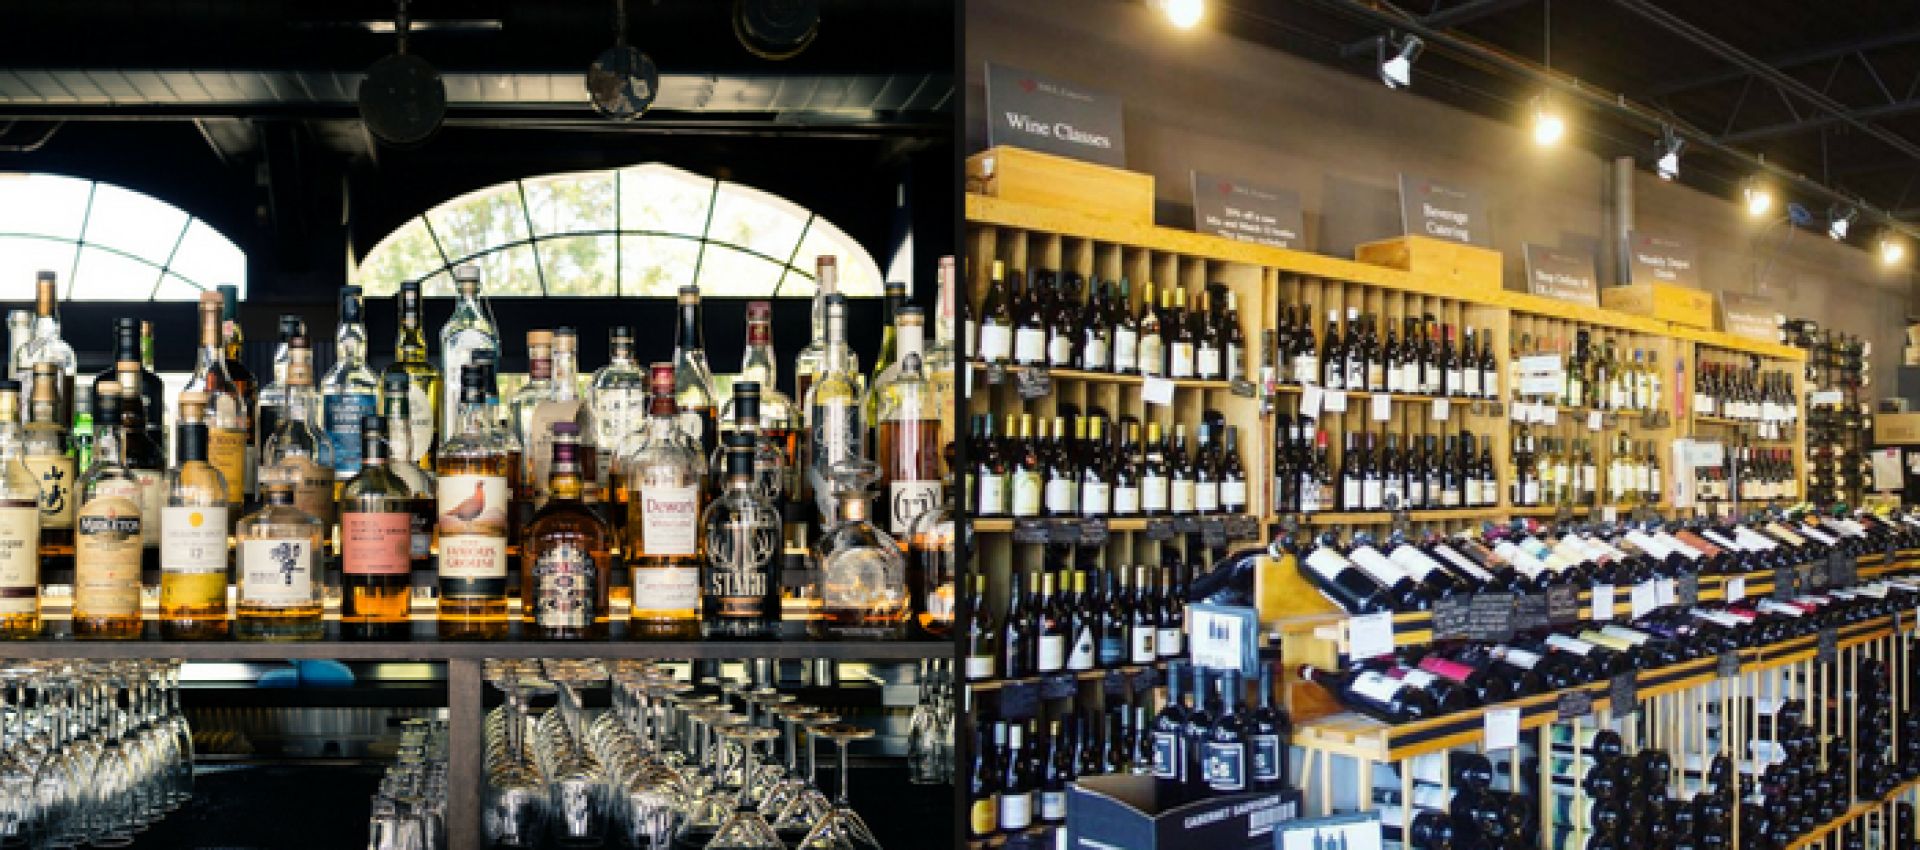 Photo for: Looking to find a wine and spirits importer in the USA?